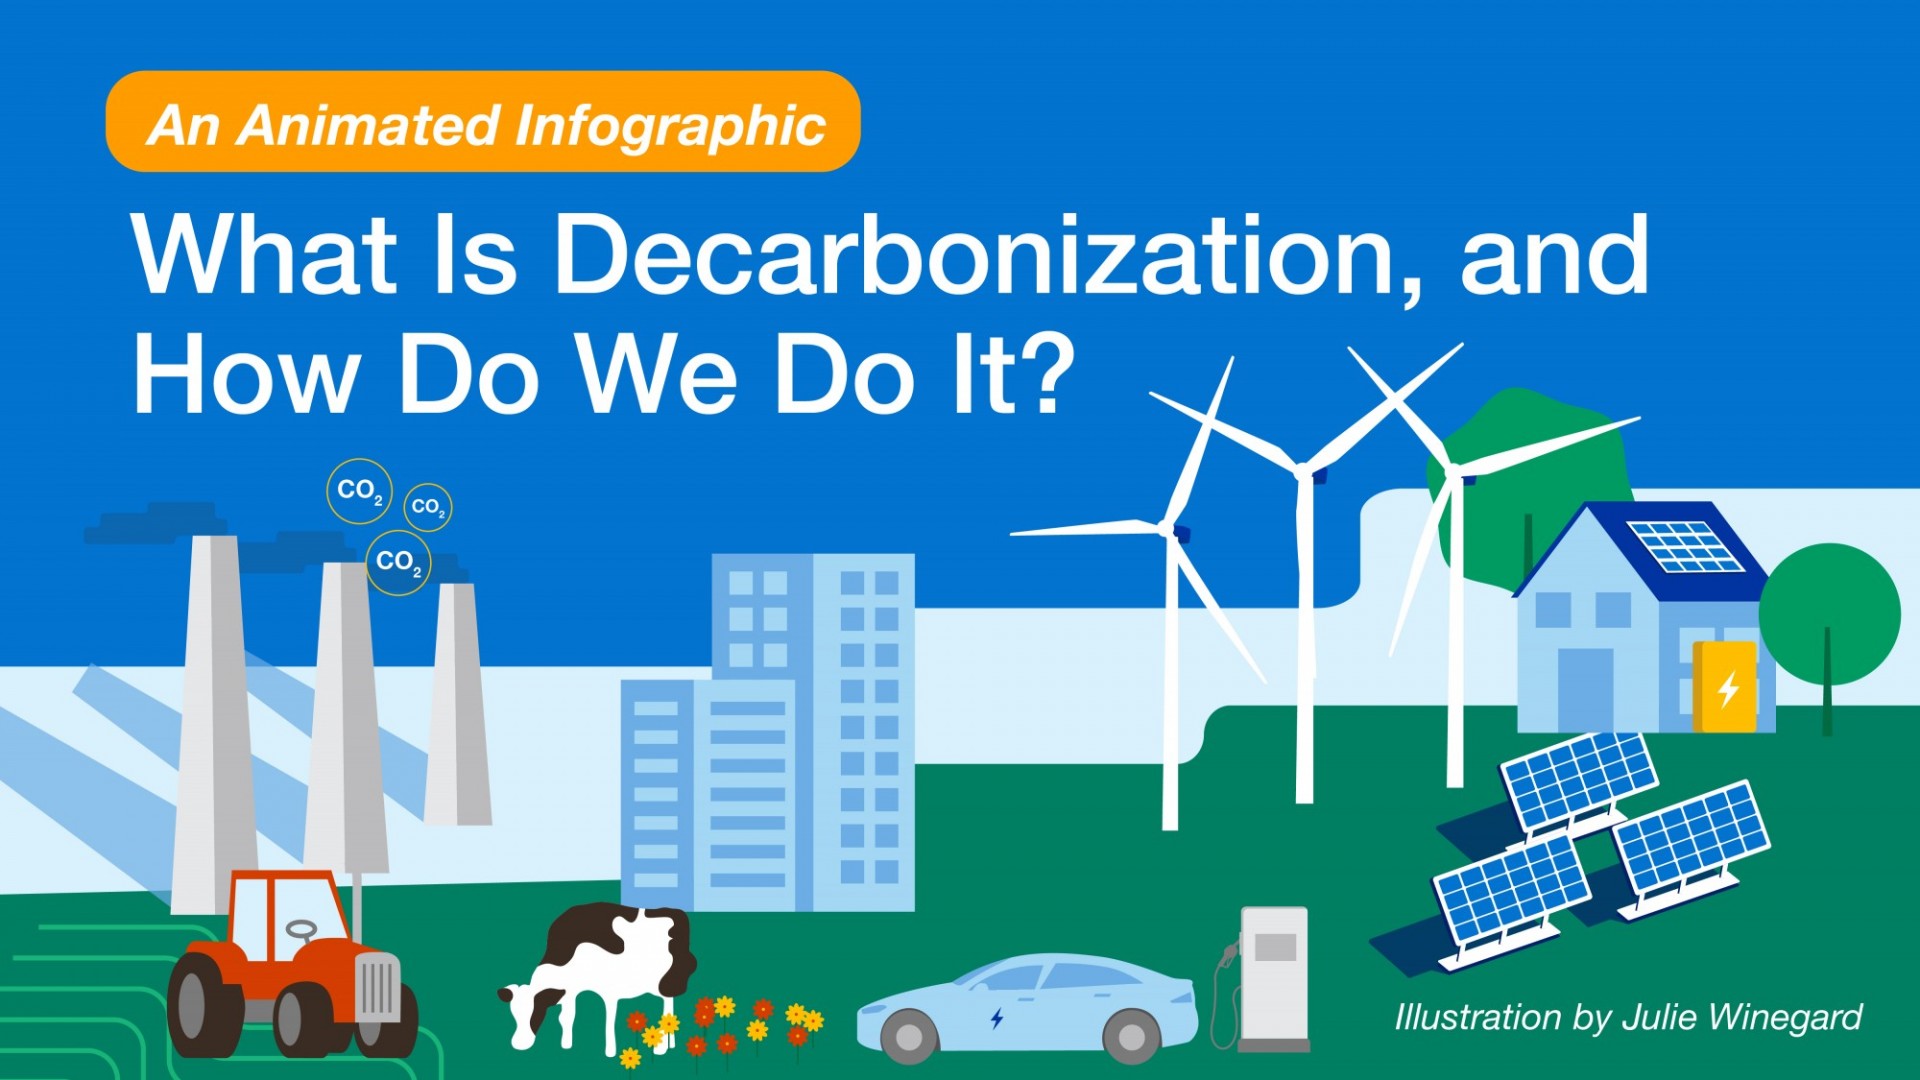 What Is Decarbonization, and How Do We Do It? An Animated Infographic